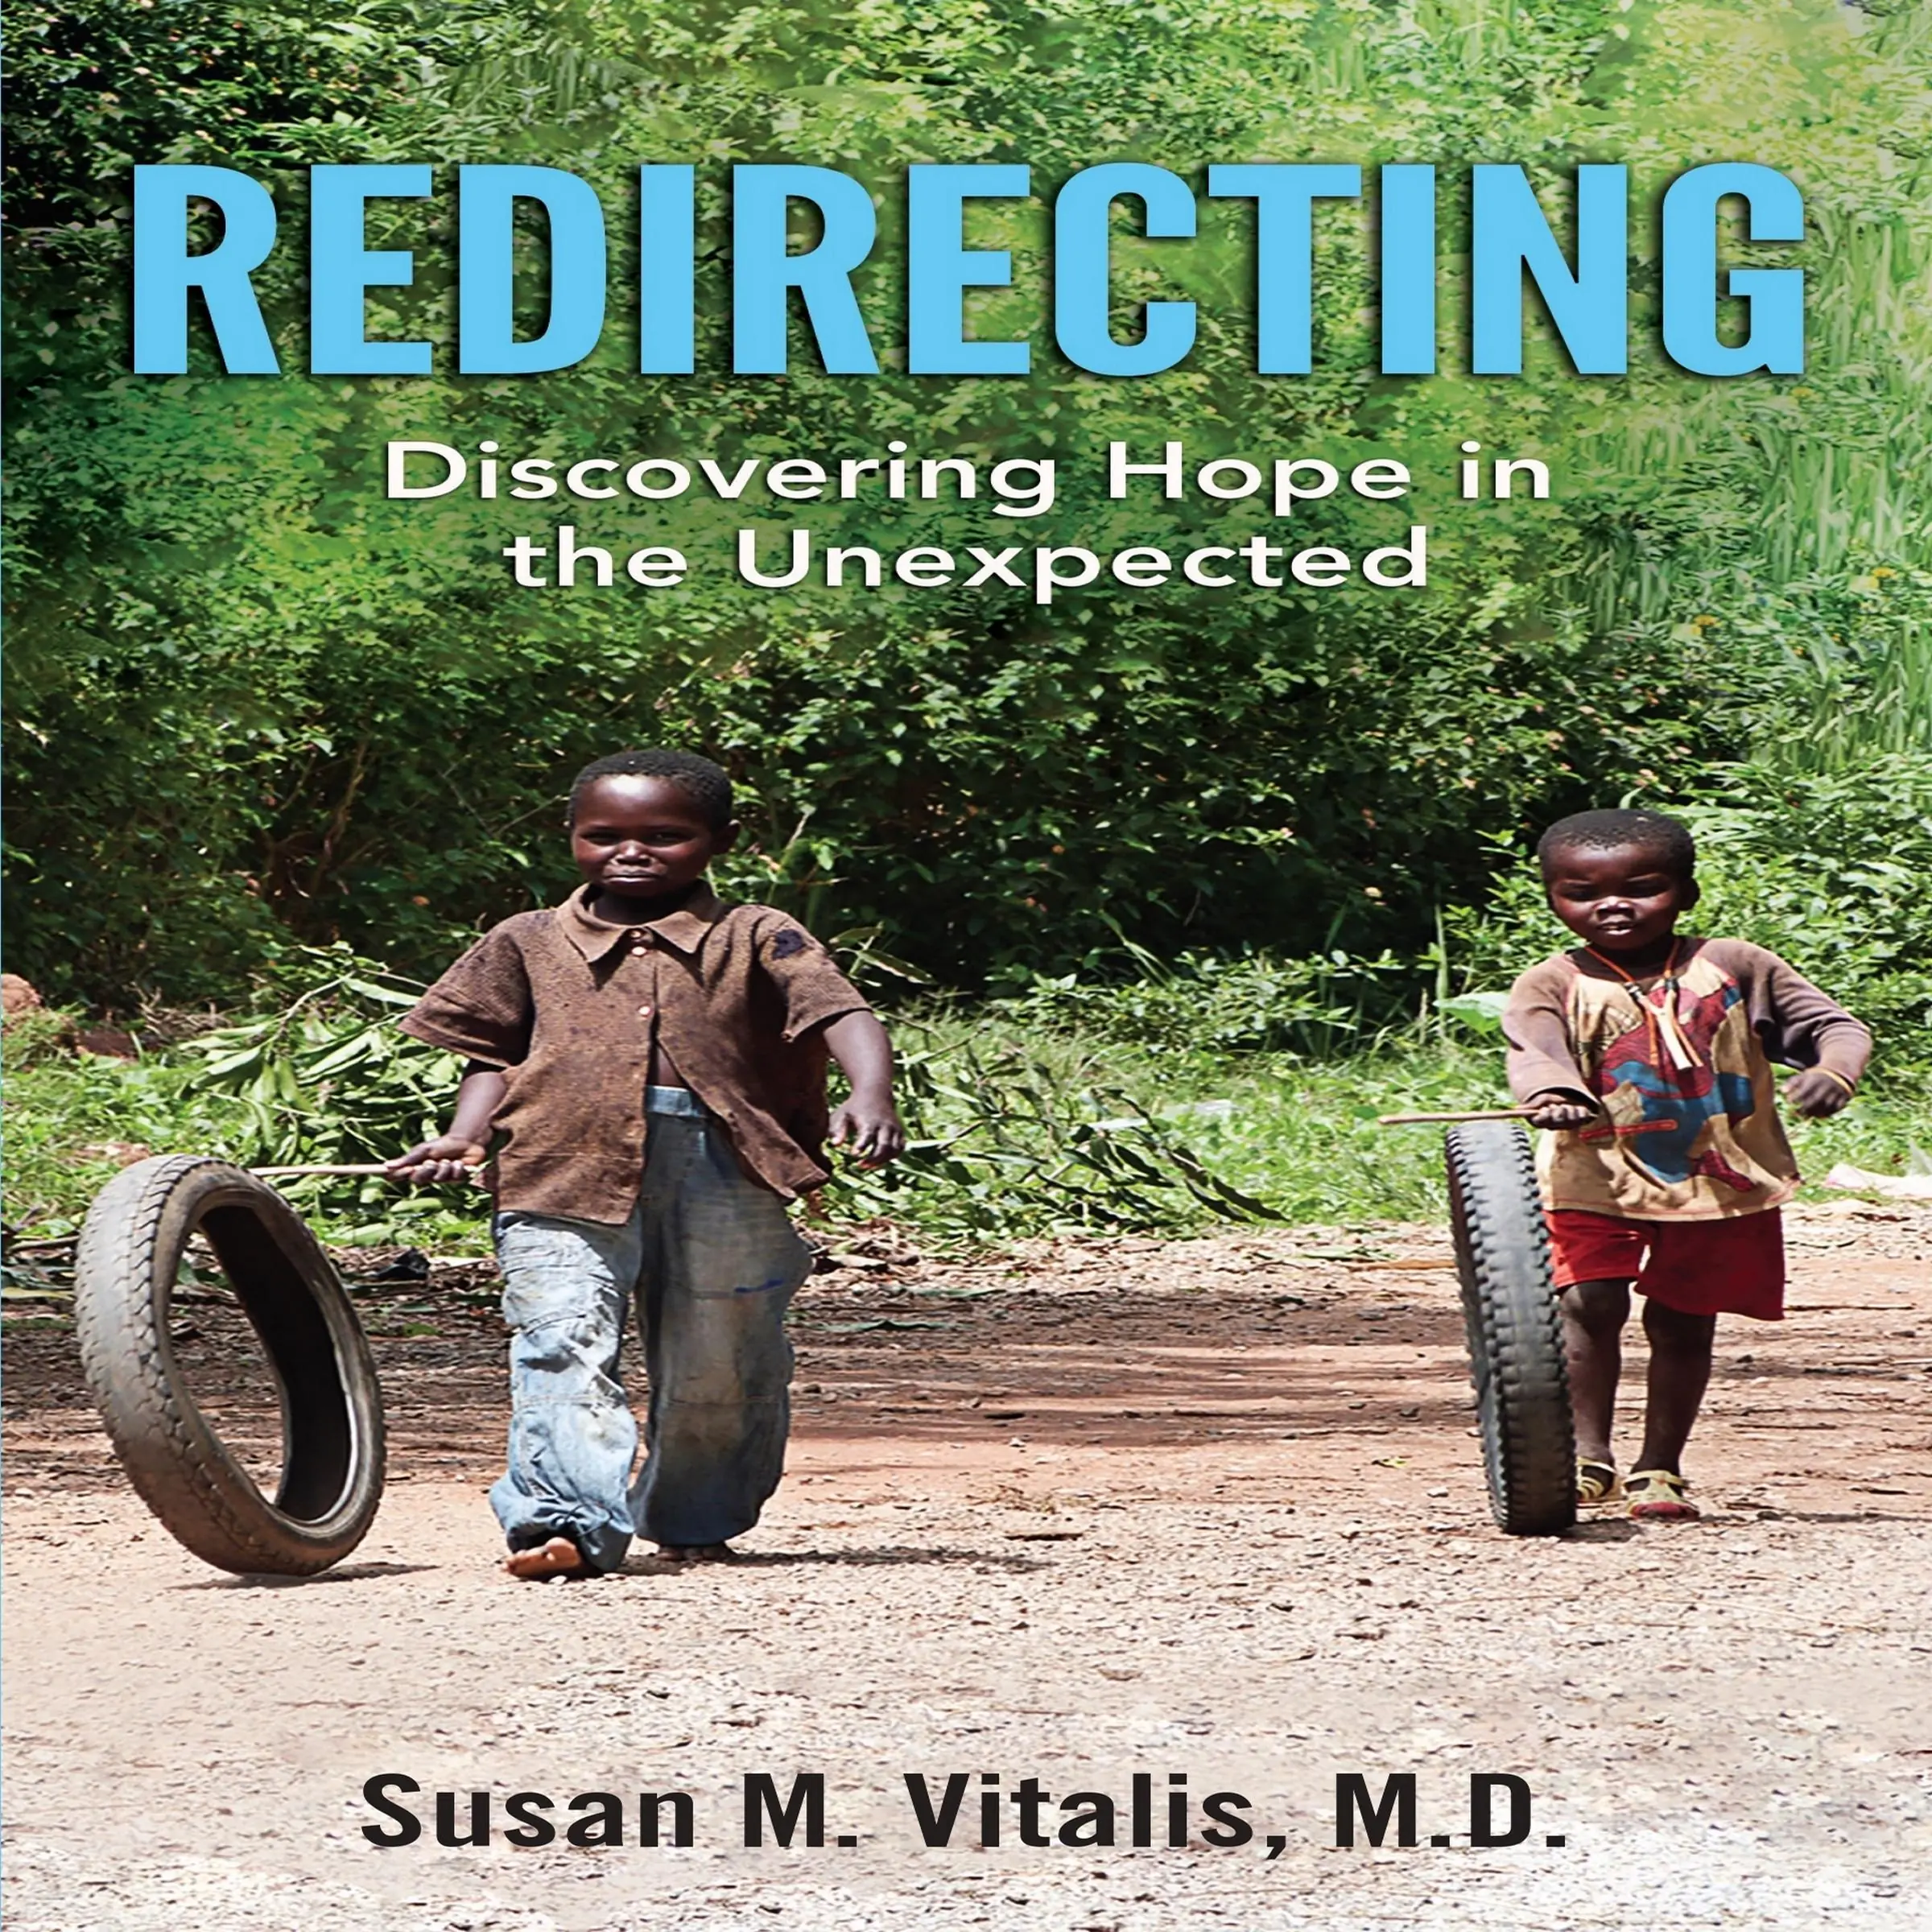 Redirecting: Discovering Hope in the Unexpected Audiobook by Susan M Vitalis MD